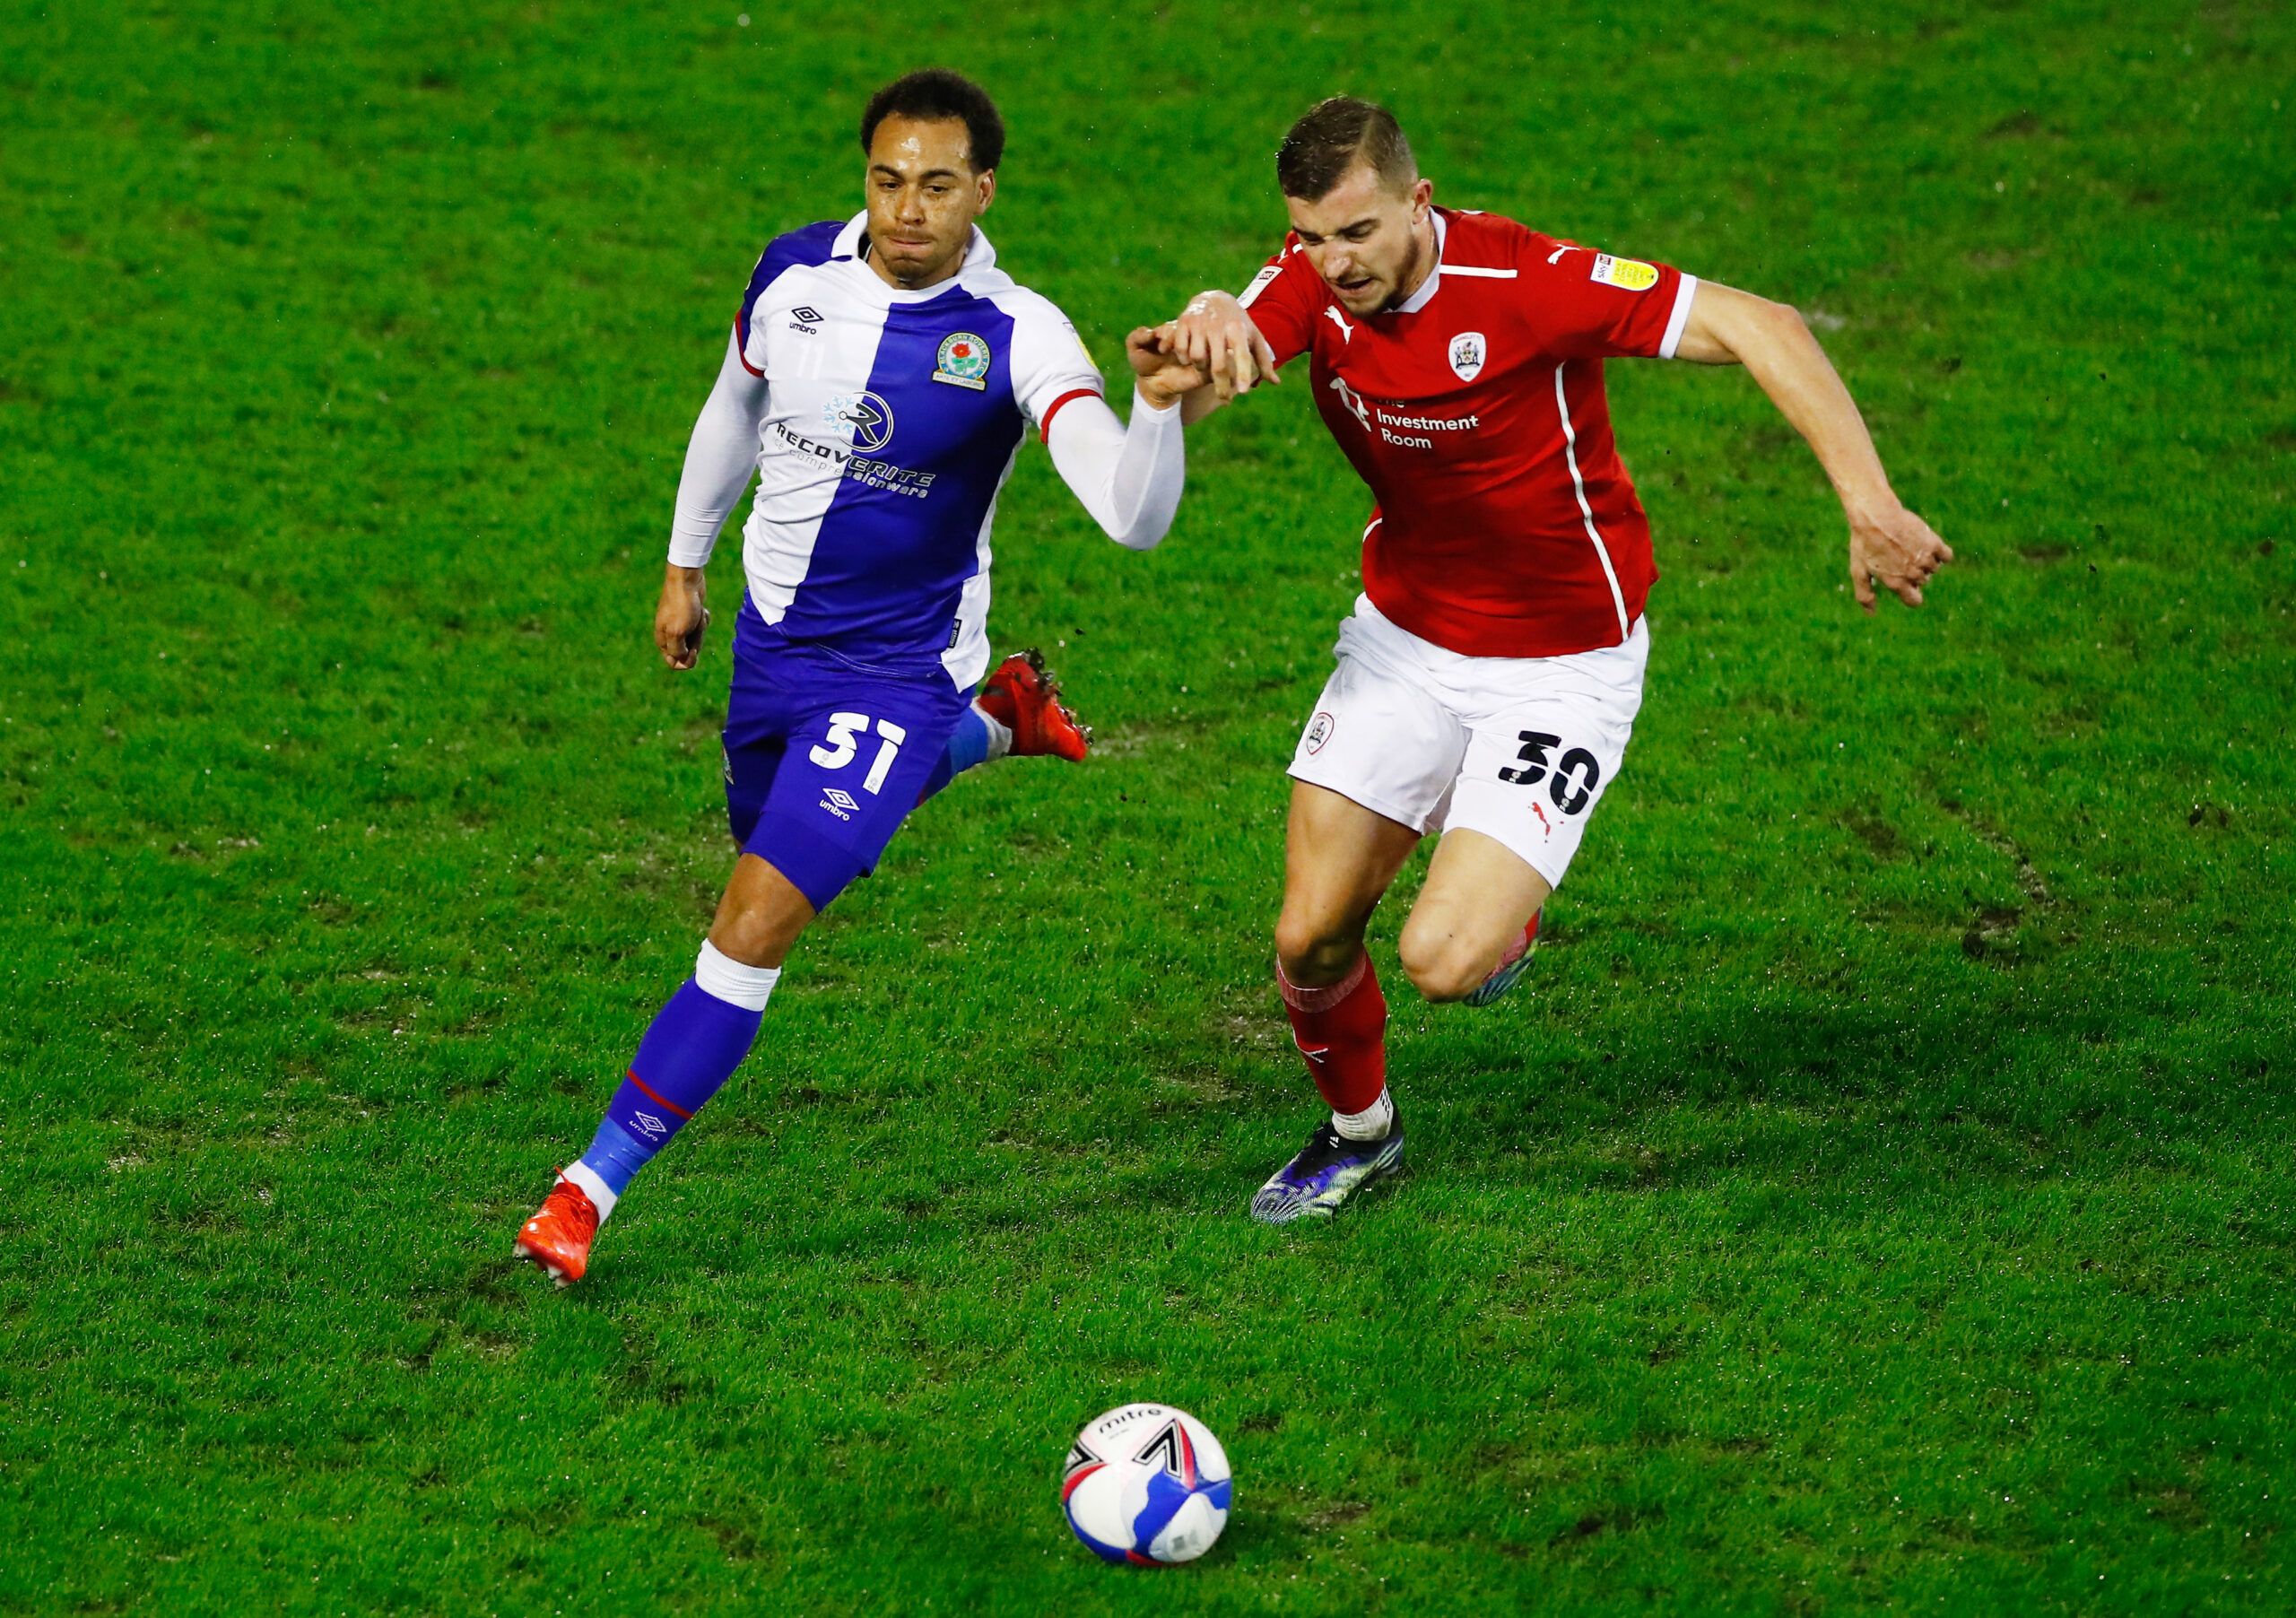 Soccer Football - Championship -  Barnsley v Blackburn Rovers - Oakwell, Barnsley, Britain - February 17, 2021  Blackburn Rovers' Elliott Bennett in action with Barnsley's Michal Helik Action Images/Jason Cairnduff EDITORIAL USE ONLY. No use with unauthorized audio, video, data, fixture lists, club/league logos or 'live' services. Online in-match use limited to 75 images, no video emulation. No use in betting, games or single club /league/player publications.  Please contact your account represe